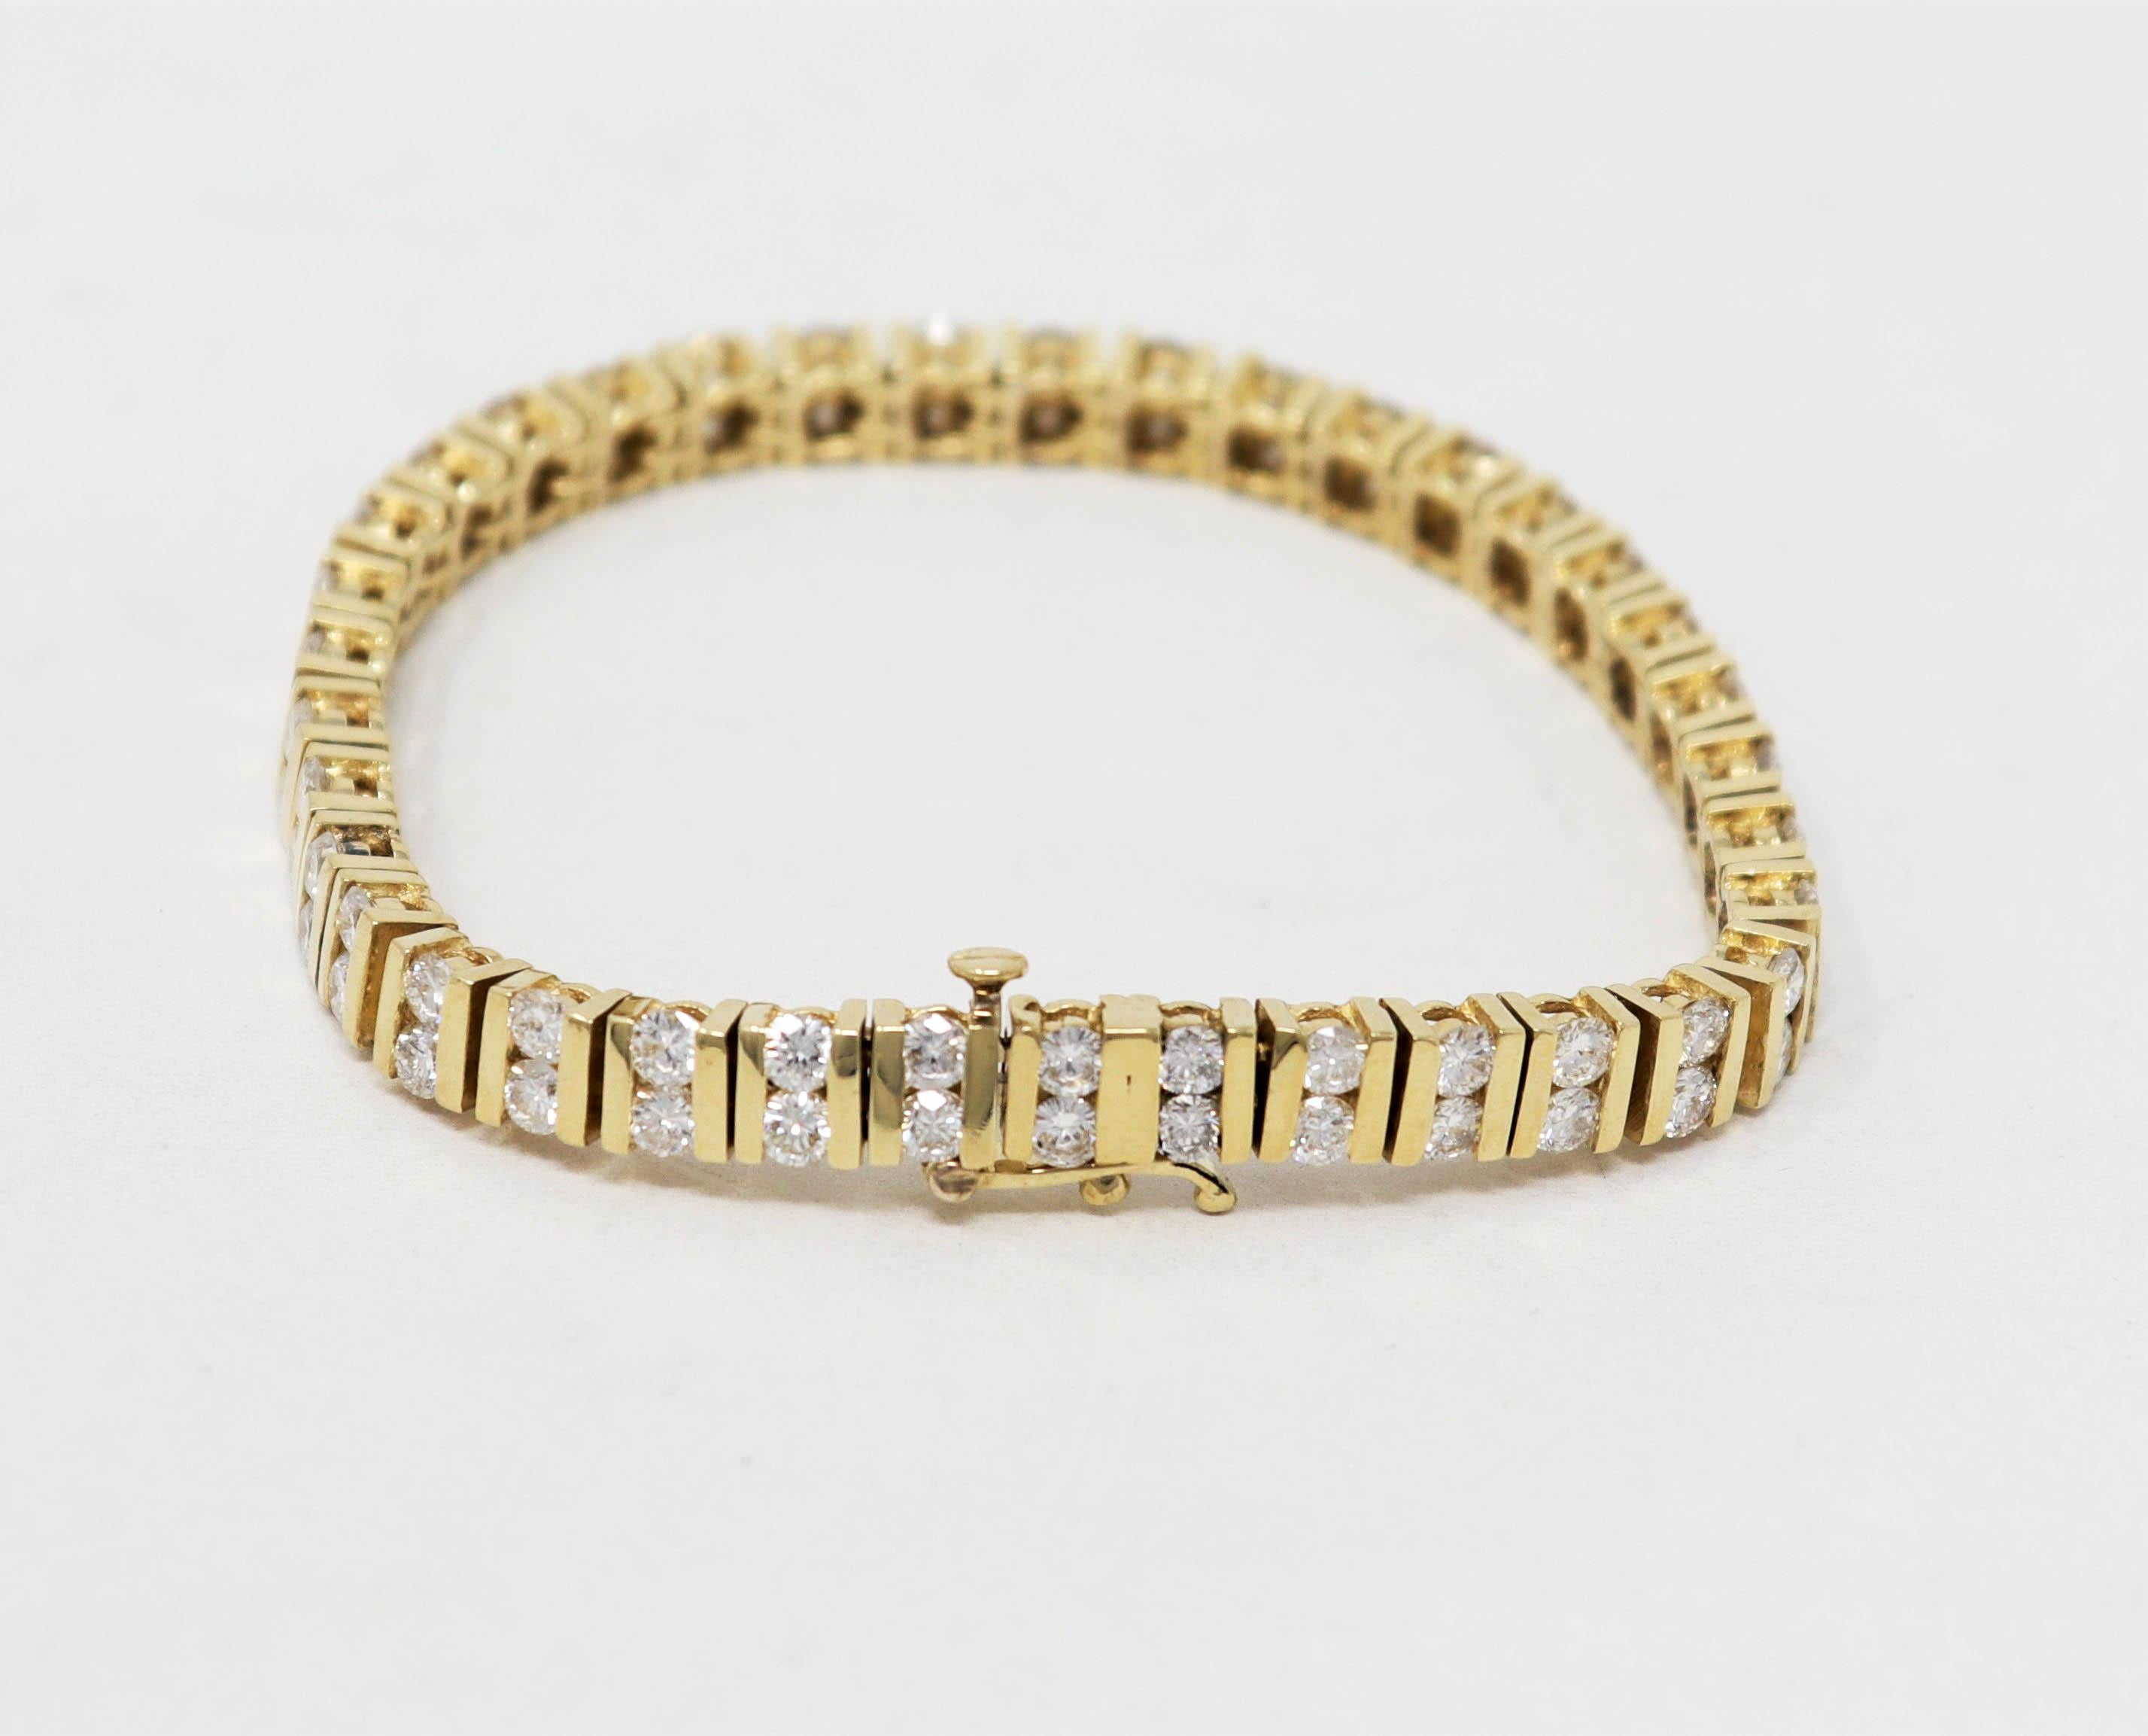 6.35 Carats Total Round Diamond Bar Link Tennis Bracelet in 14 Karat Yellow Gold In Good Condition For Sale In Scottsdale, AZ